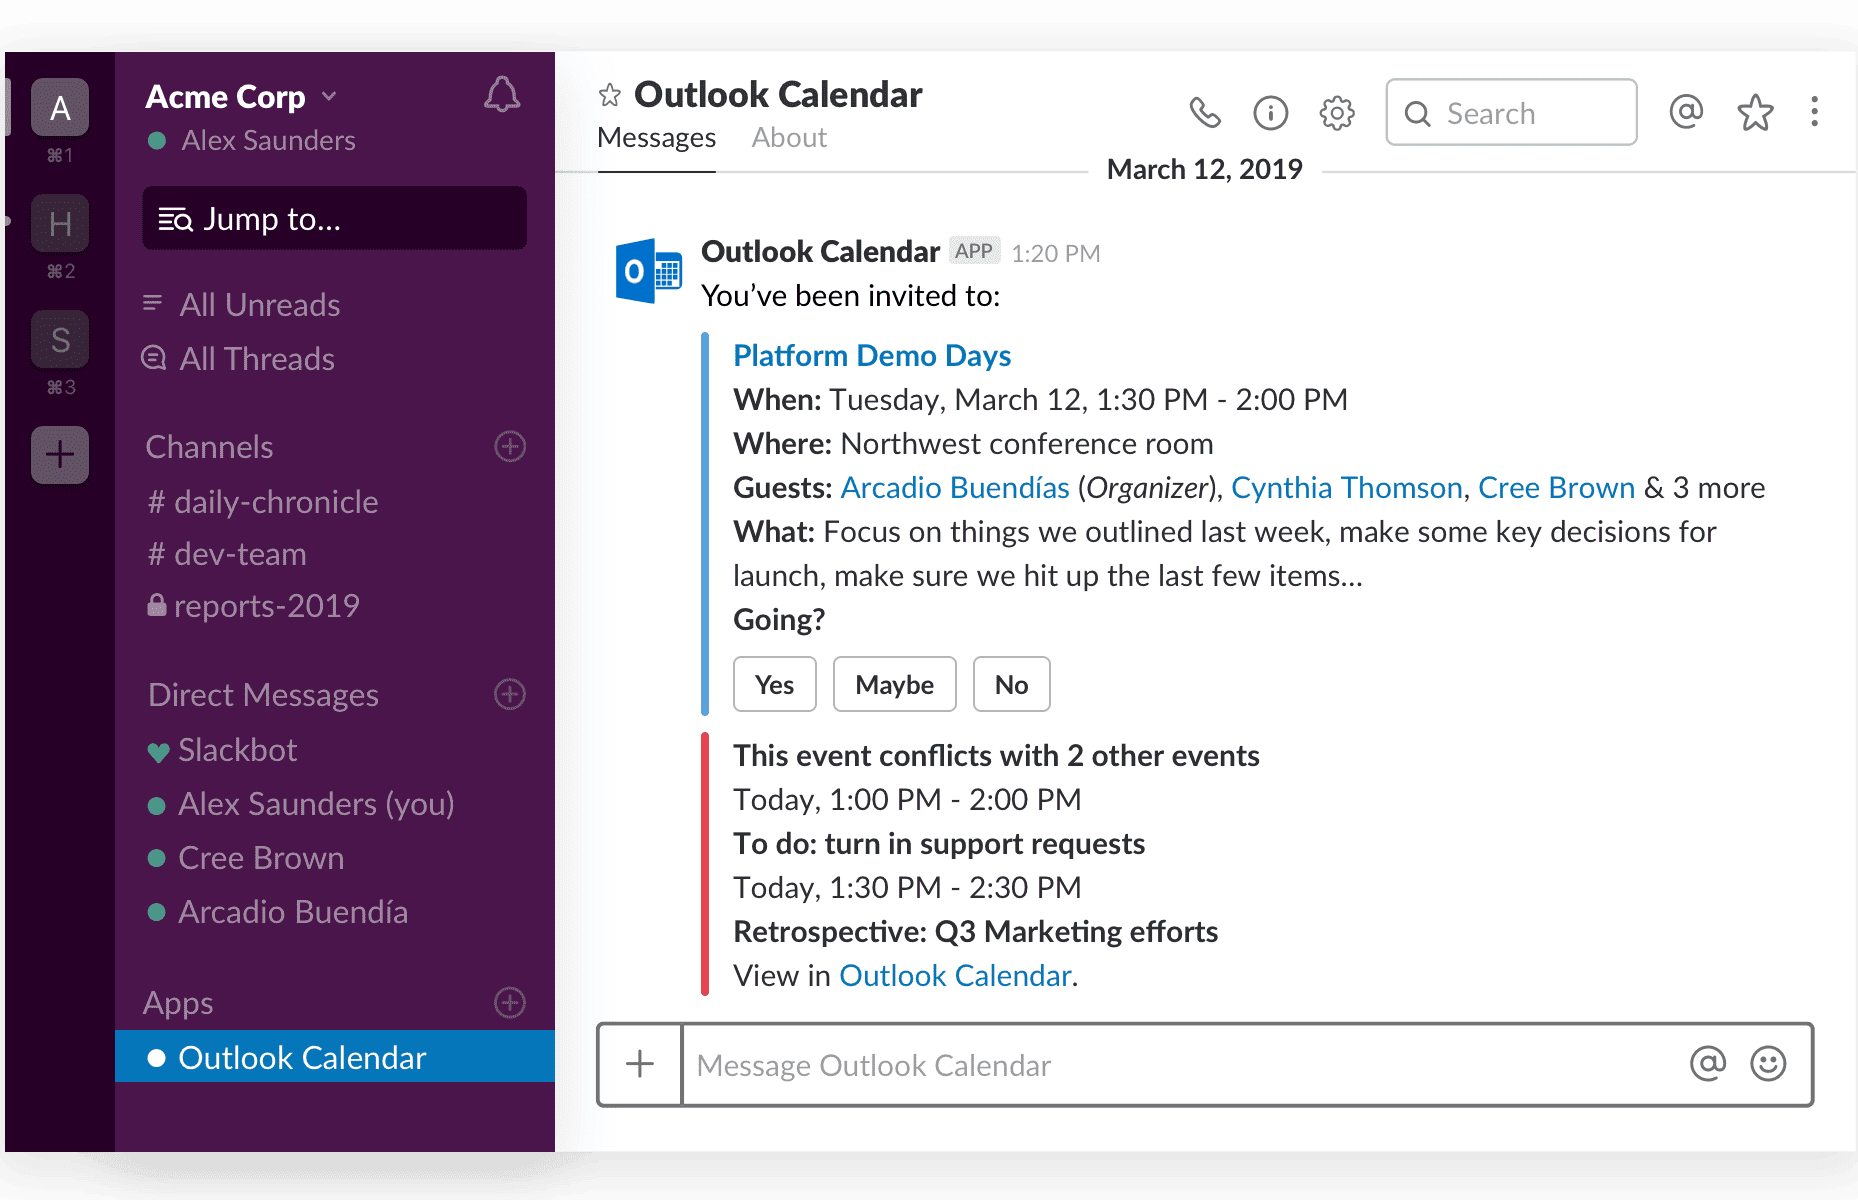 Slack Announces Office 365 Integrations for Outlook, OneDrive, Word